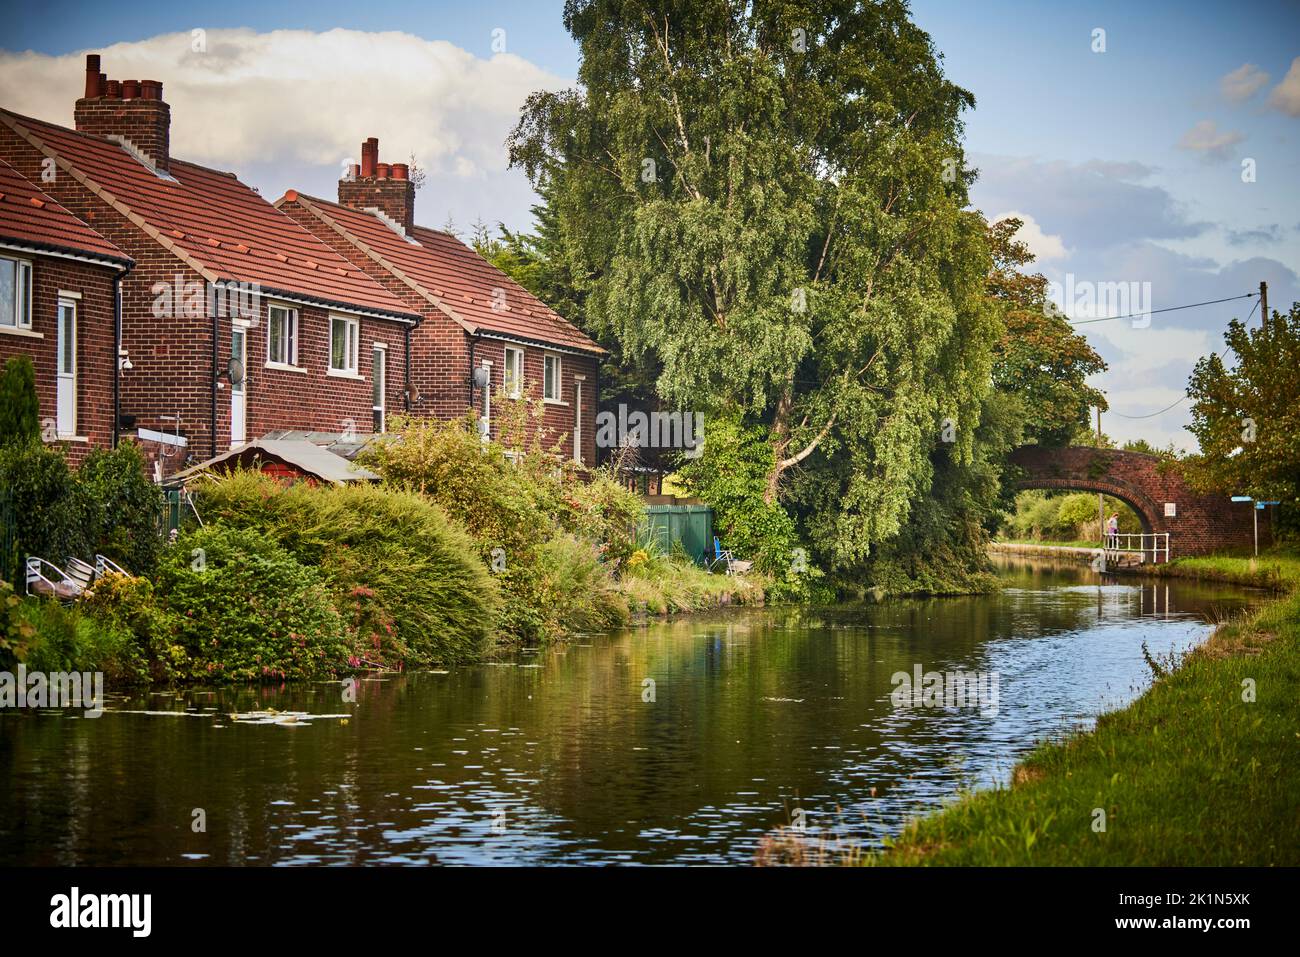 Bridgewater canal in Astley, Gtr Manchester Stock Photo